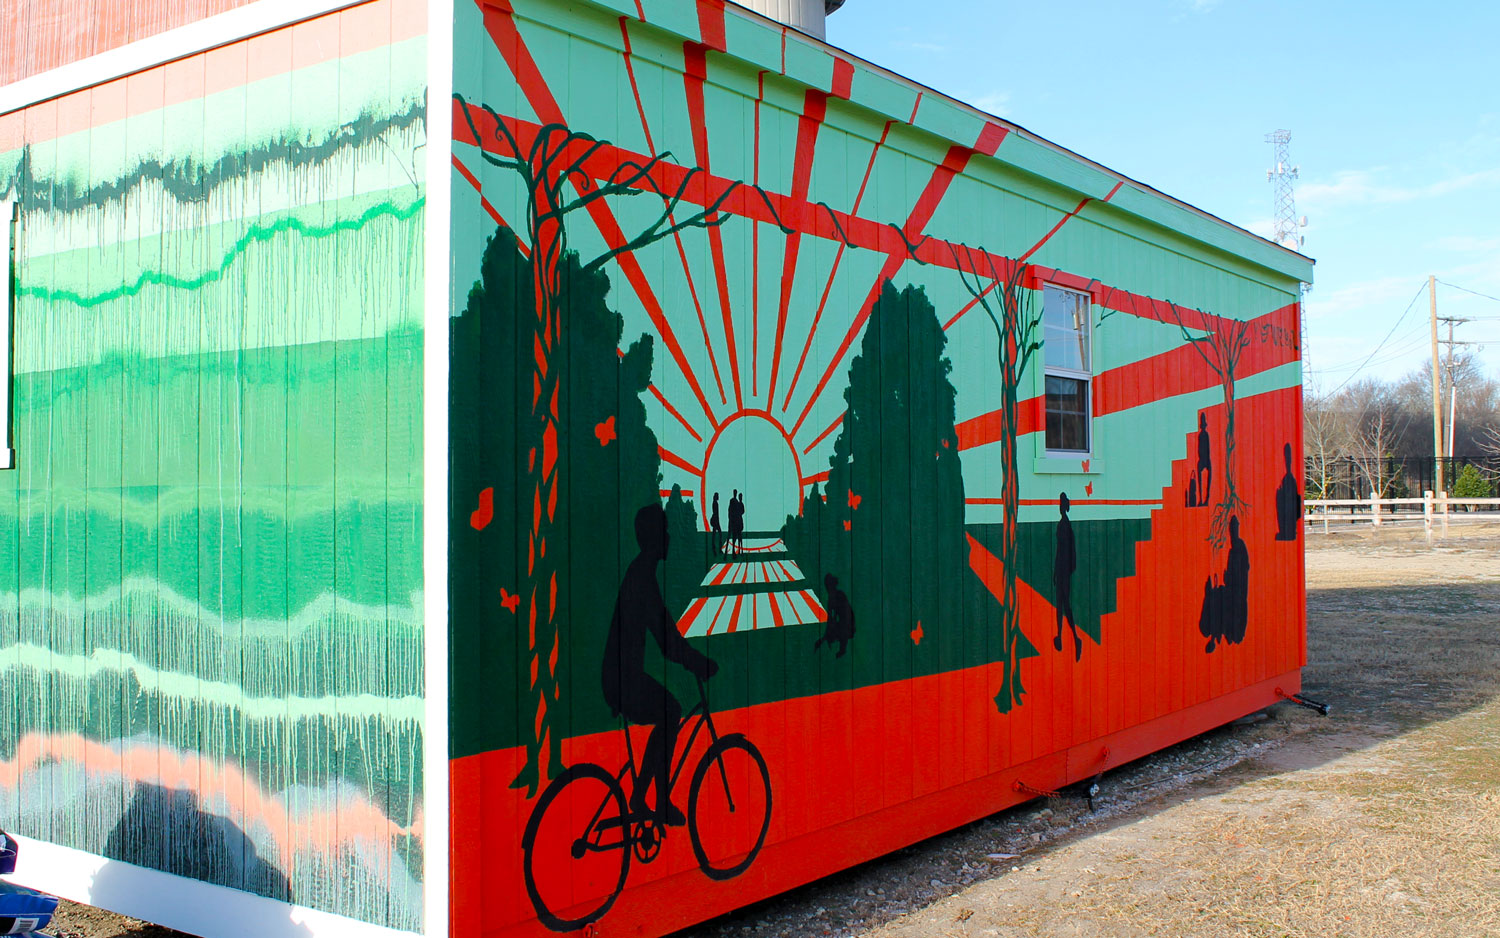 The side of a single-story gabled-roof building, painted with an abstract mural depicting the Trellis Plaza in Margaret McDermott Mall at UT Dallas.